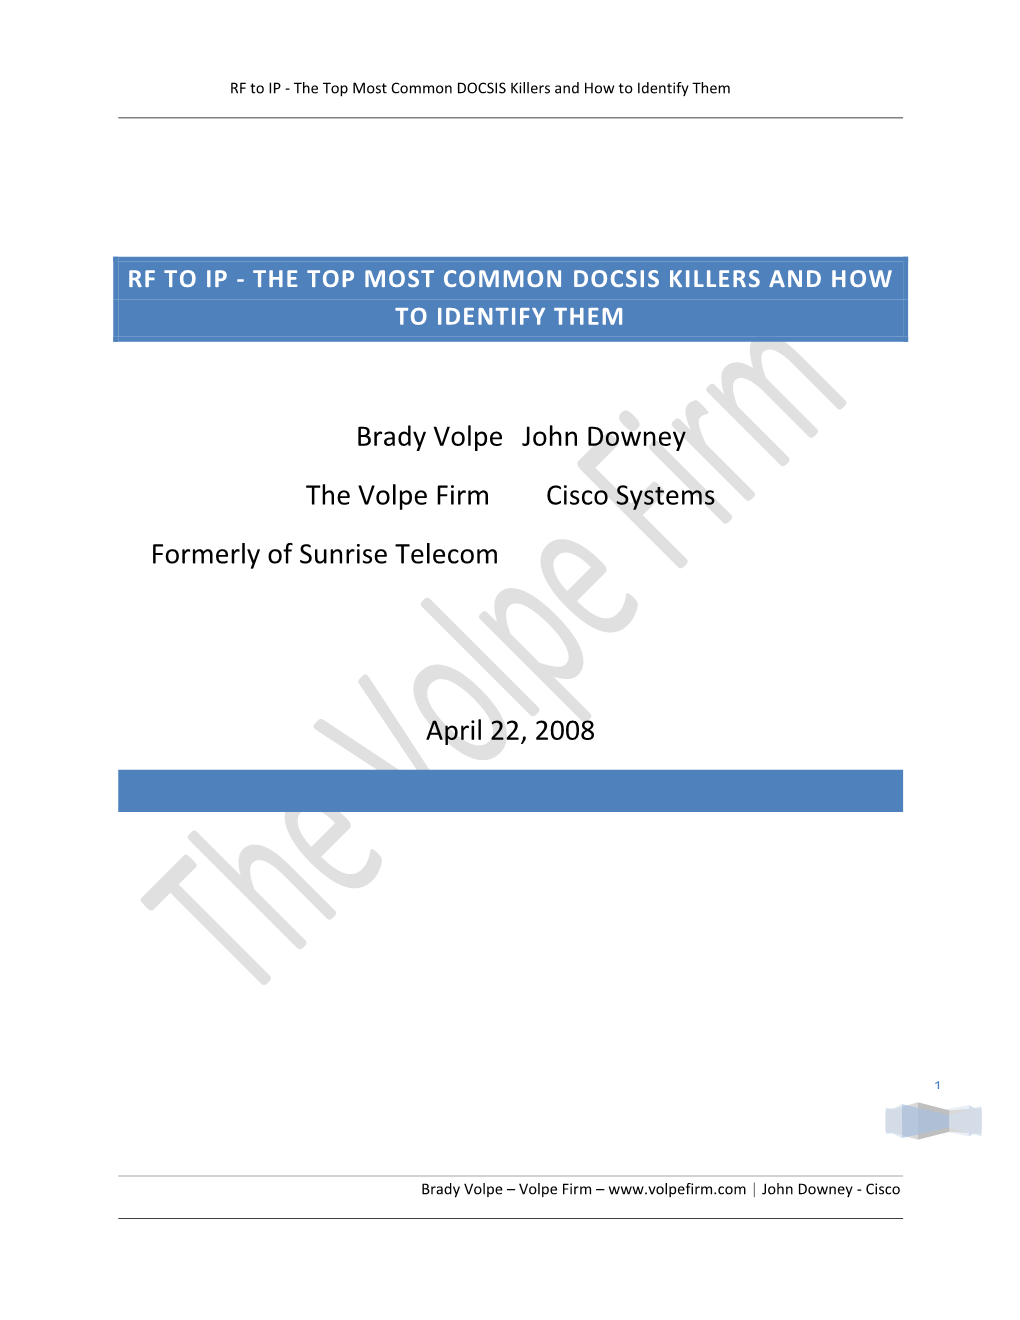 Brady Volpe John Downey the Volpe Firm Cisco Systems Formerly of Sunrise Telecom